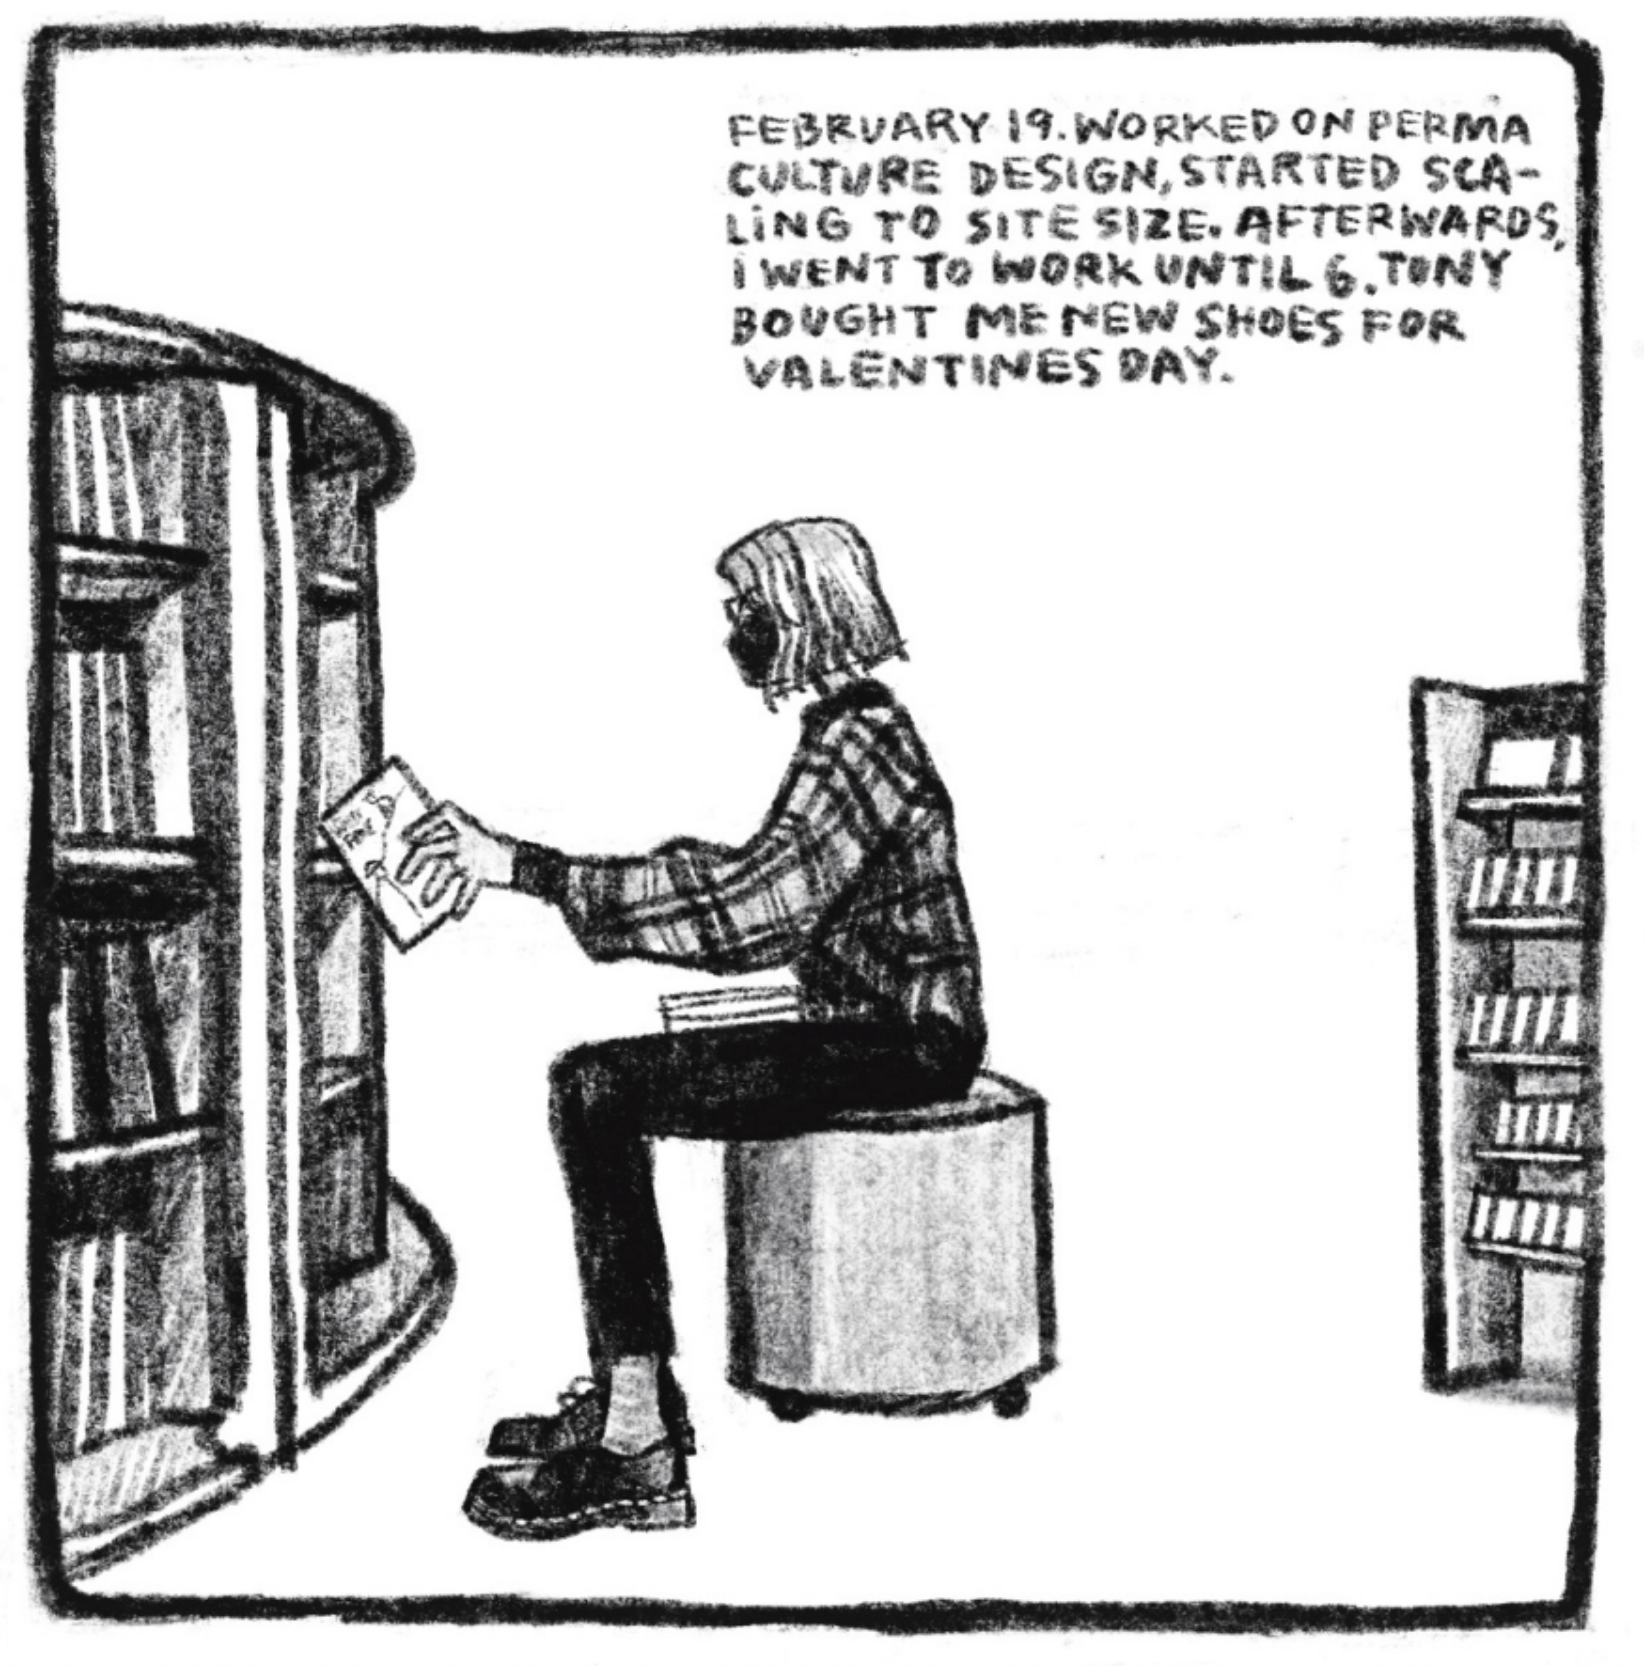 Hold Still Episode 9, Panel 3
Top right corner reads: "FEBRUARY 19. WORKED ON PERMA CULTURE DESIGN, STARTED SCALING TO SITE SIZE. AFTERWARDS, I WENT TO WORK UNTIL 6. TONY BOUGHT ME NEW SHOES FOR VALENTINES DAY."
Side view drawing of Kim sitting on an ottoman, pulling a book from a book case. She is wearing a mask, a flannel, and docs.